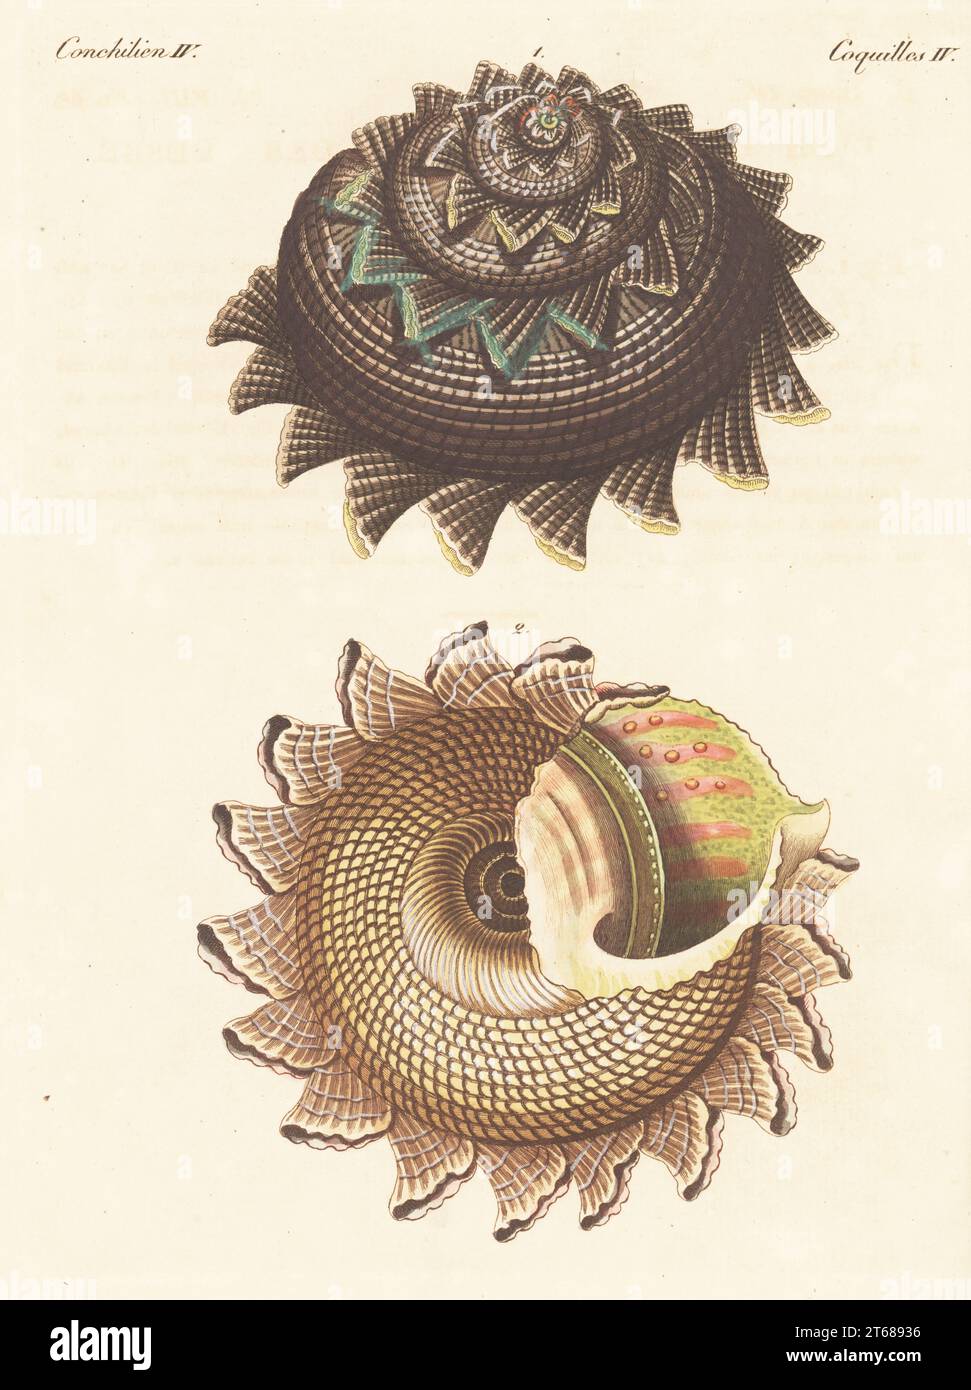 Sunburst star turban or the circular saw shell, Astraea heliotropium, dorsal 1, ventral 2. Large sea snail, marine gastropod mollusc. Le soleil imperial ou l'eperon royal, Trochus imperialis. Handcoloured copperplate engraving from Carl Bertuch's Bilderbuch fur Kinder (Picture Book for Children), Weimar, 1815. A 12-volume encyclopedia for children illustrated with almost 1,200 engraved plates on natural history, science, costume, mythology, etc., published from 1790-1830. Stock Photo